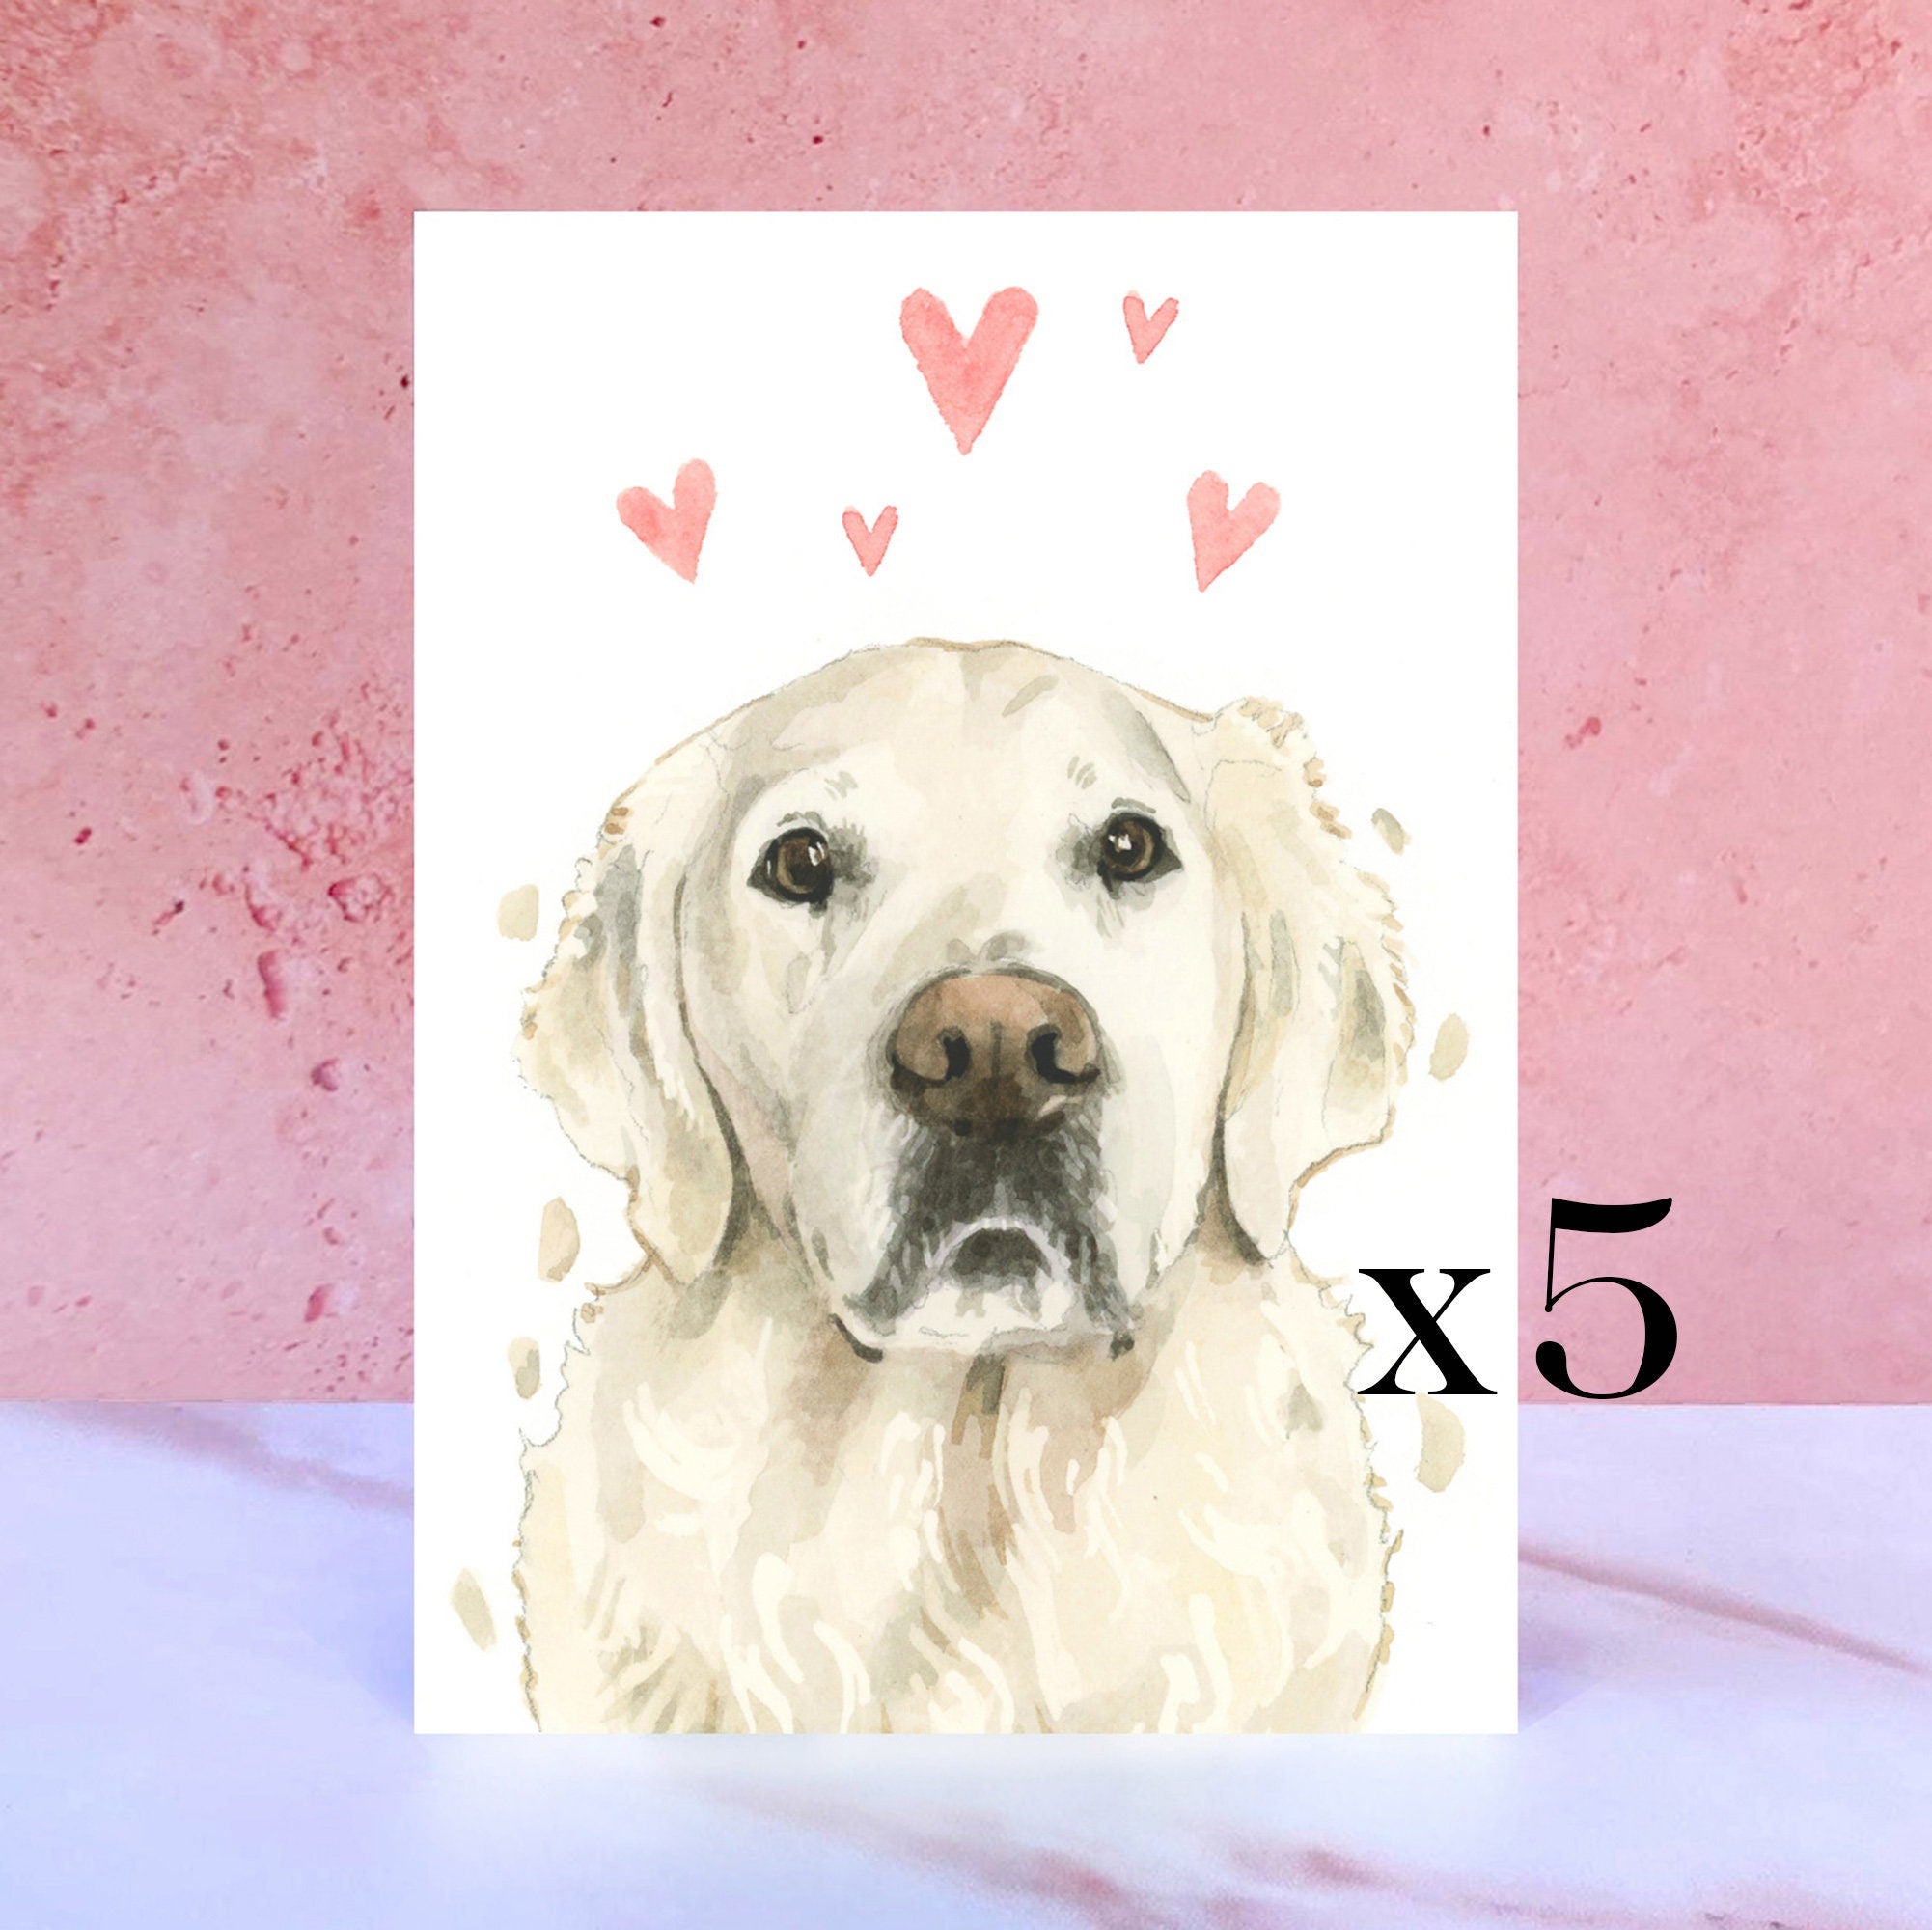 Pack of 5 Cream Golden Retriever Licks & Kisses Card for Valentines, Anniversaries and from the Dog